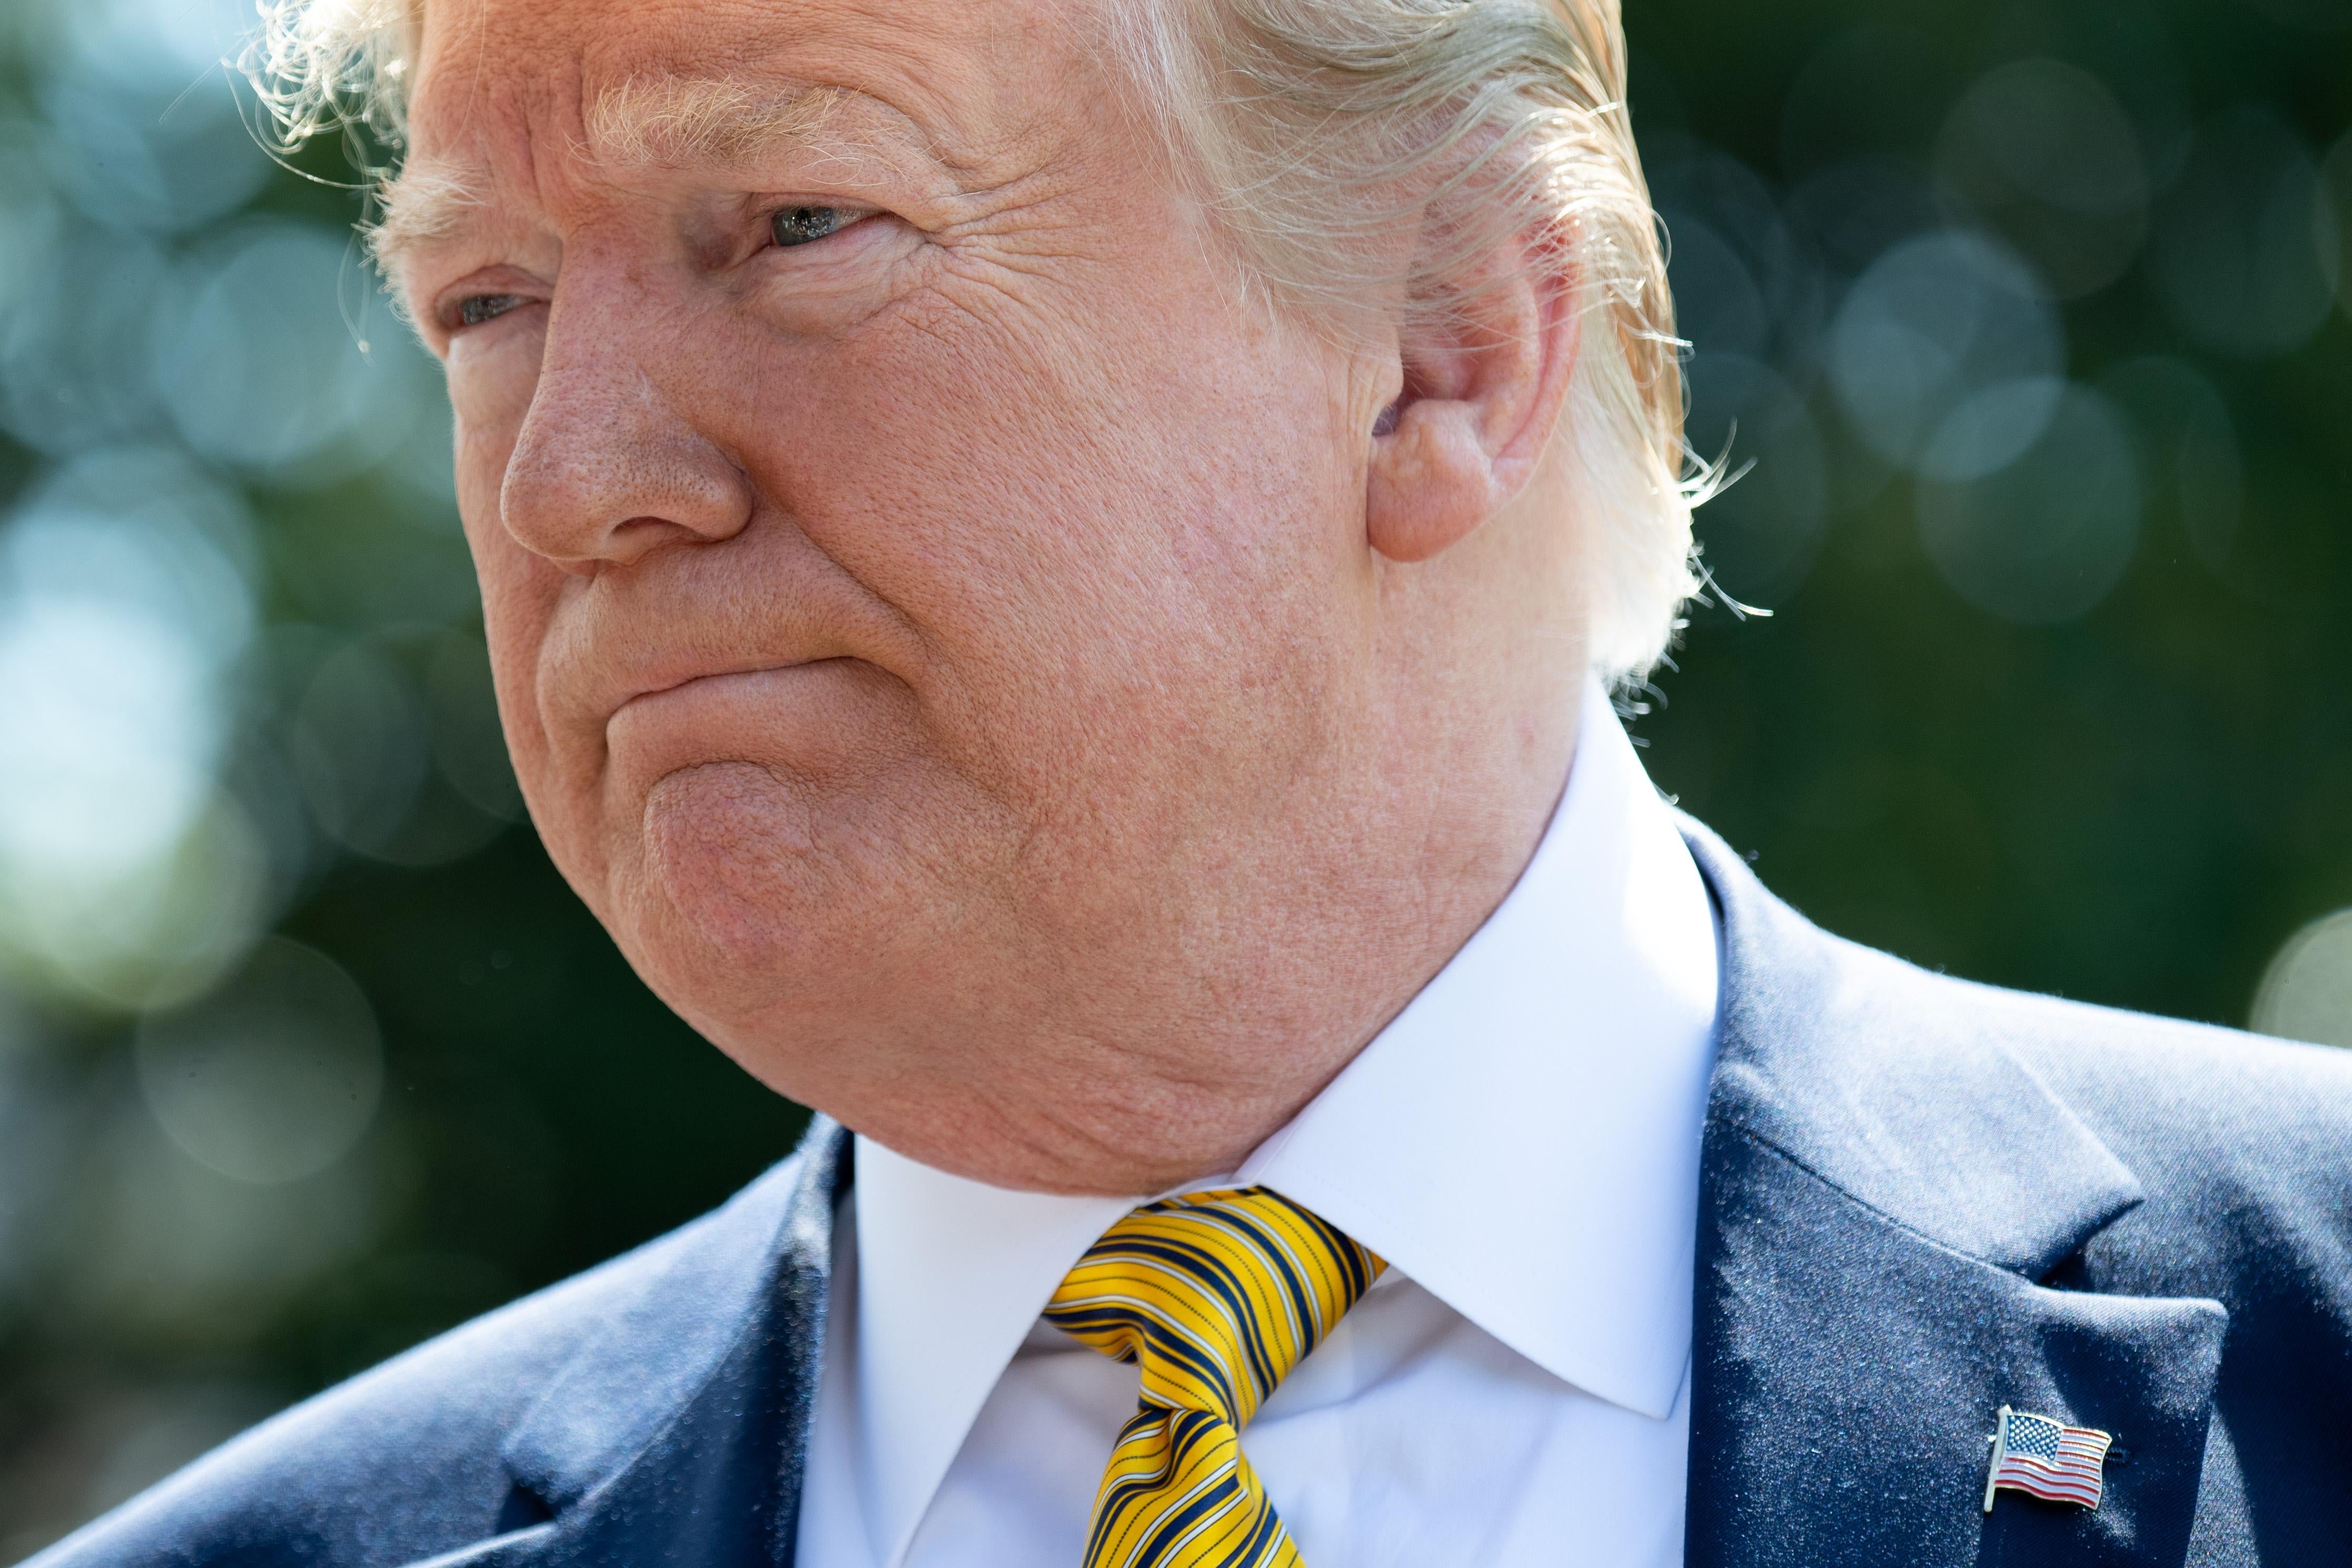 President Donald Trump speaks to the media prior to departing on Marine One from the South Lawn of the White House in Washington, D.C. on June 22, 2019, as he travels to Camp David, Maryland.